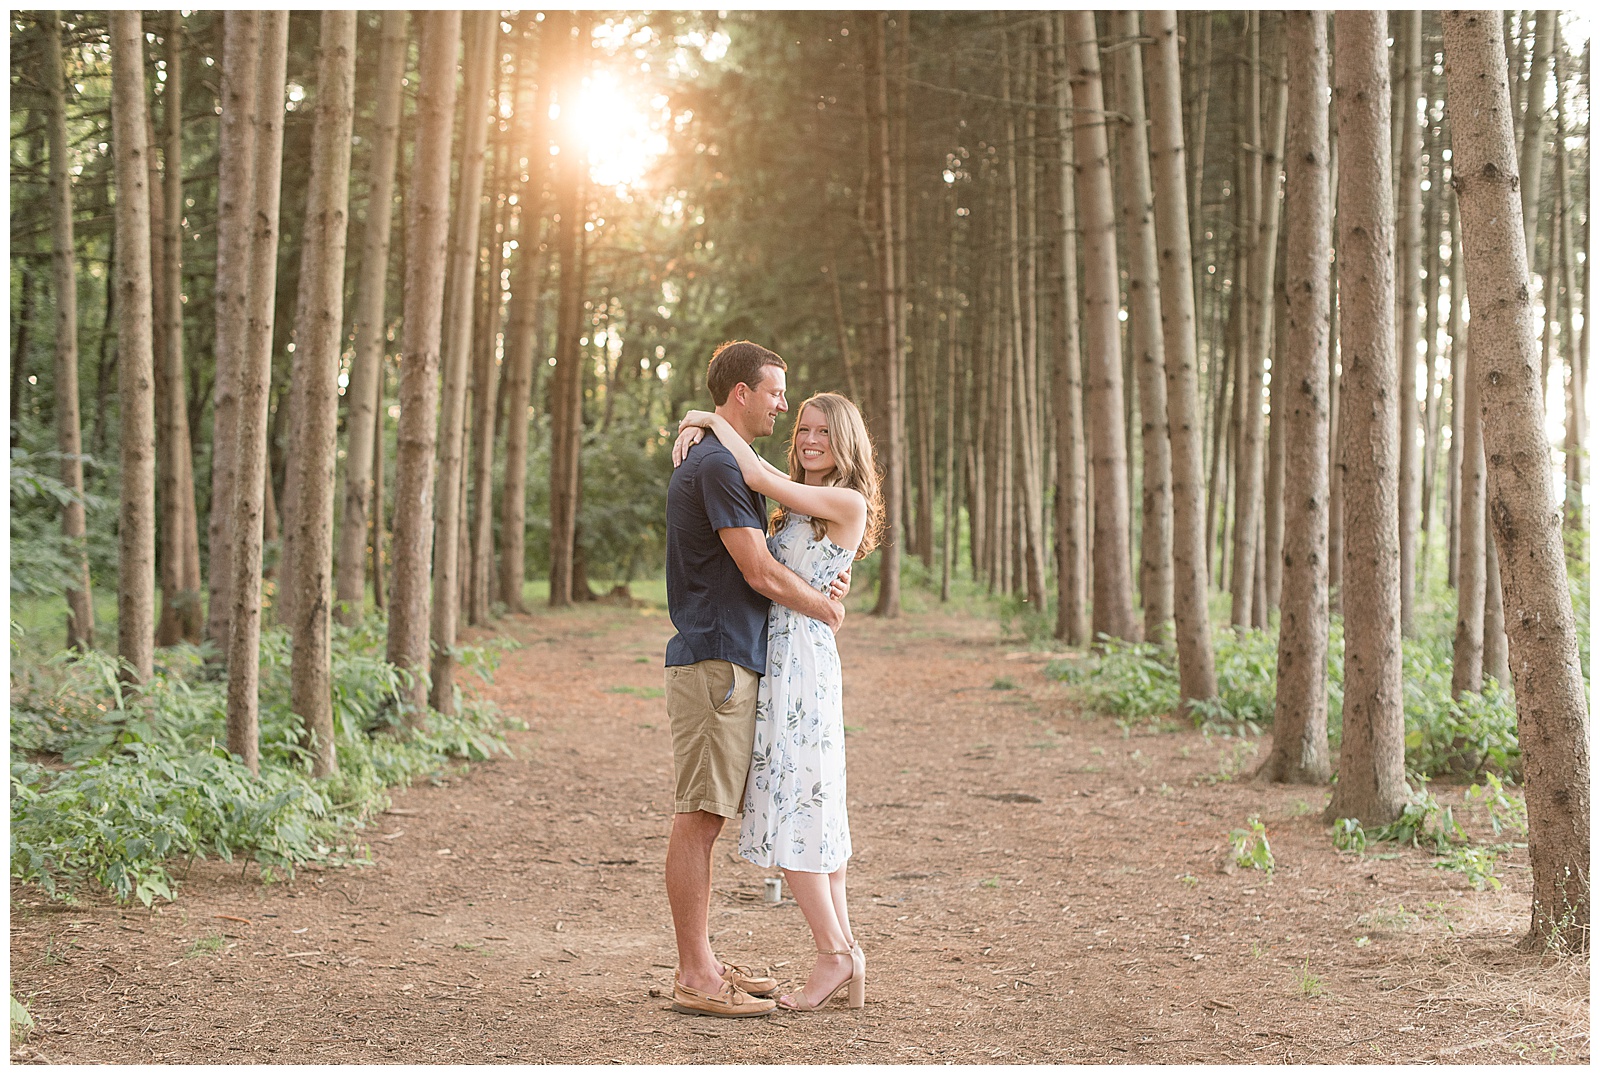 couple standing close in pine tree grove at overlook park with sun peeking through trees behind them on summer night